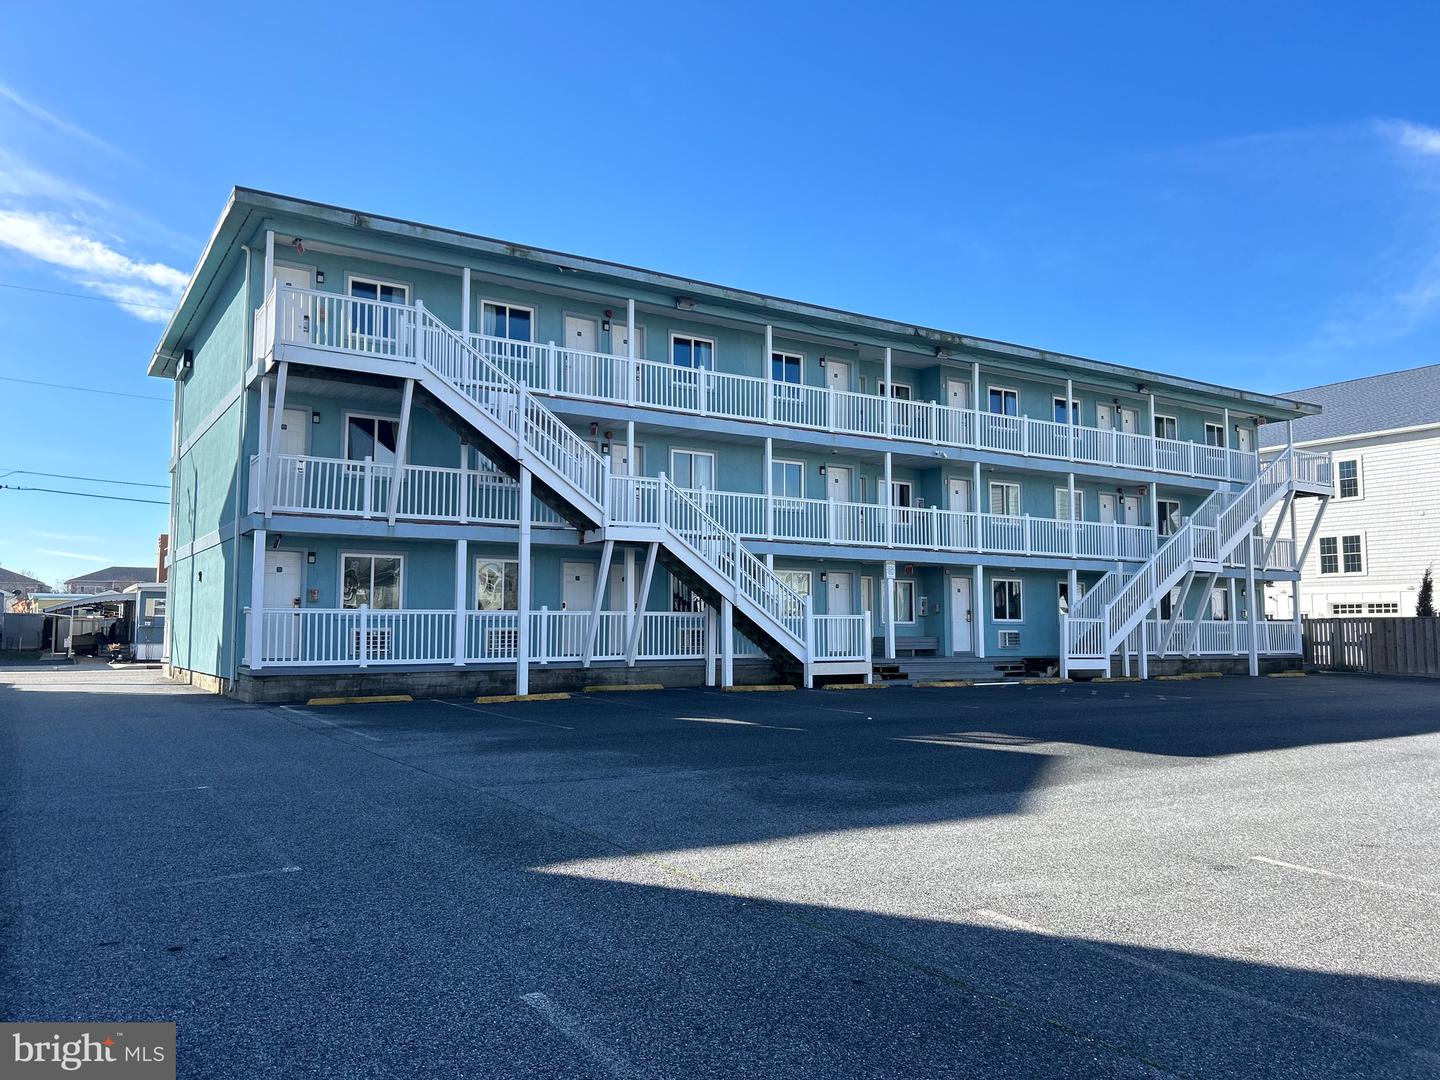 MDWO2018634-802837904008-2024-02-02-16-41-05 216 25th St | Ocean City, MD Real Estate For Sale | MLS# Mdwo2018634  - 1st Choice Properties